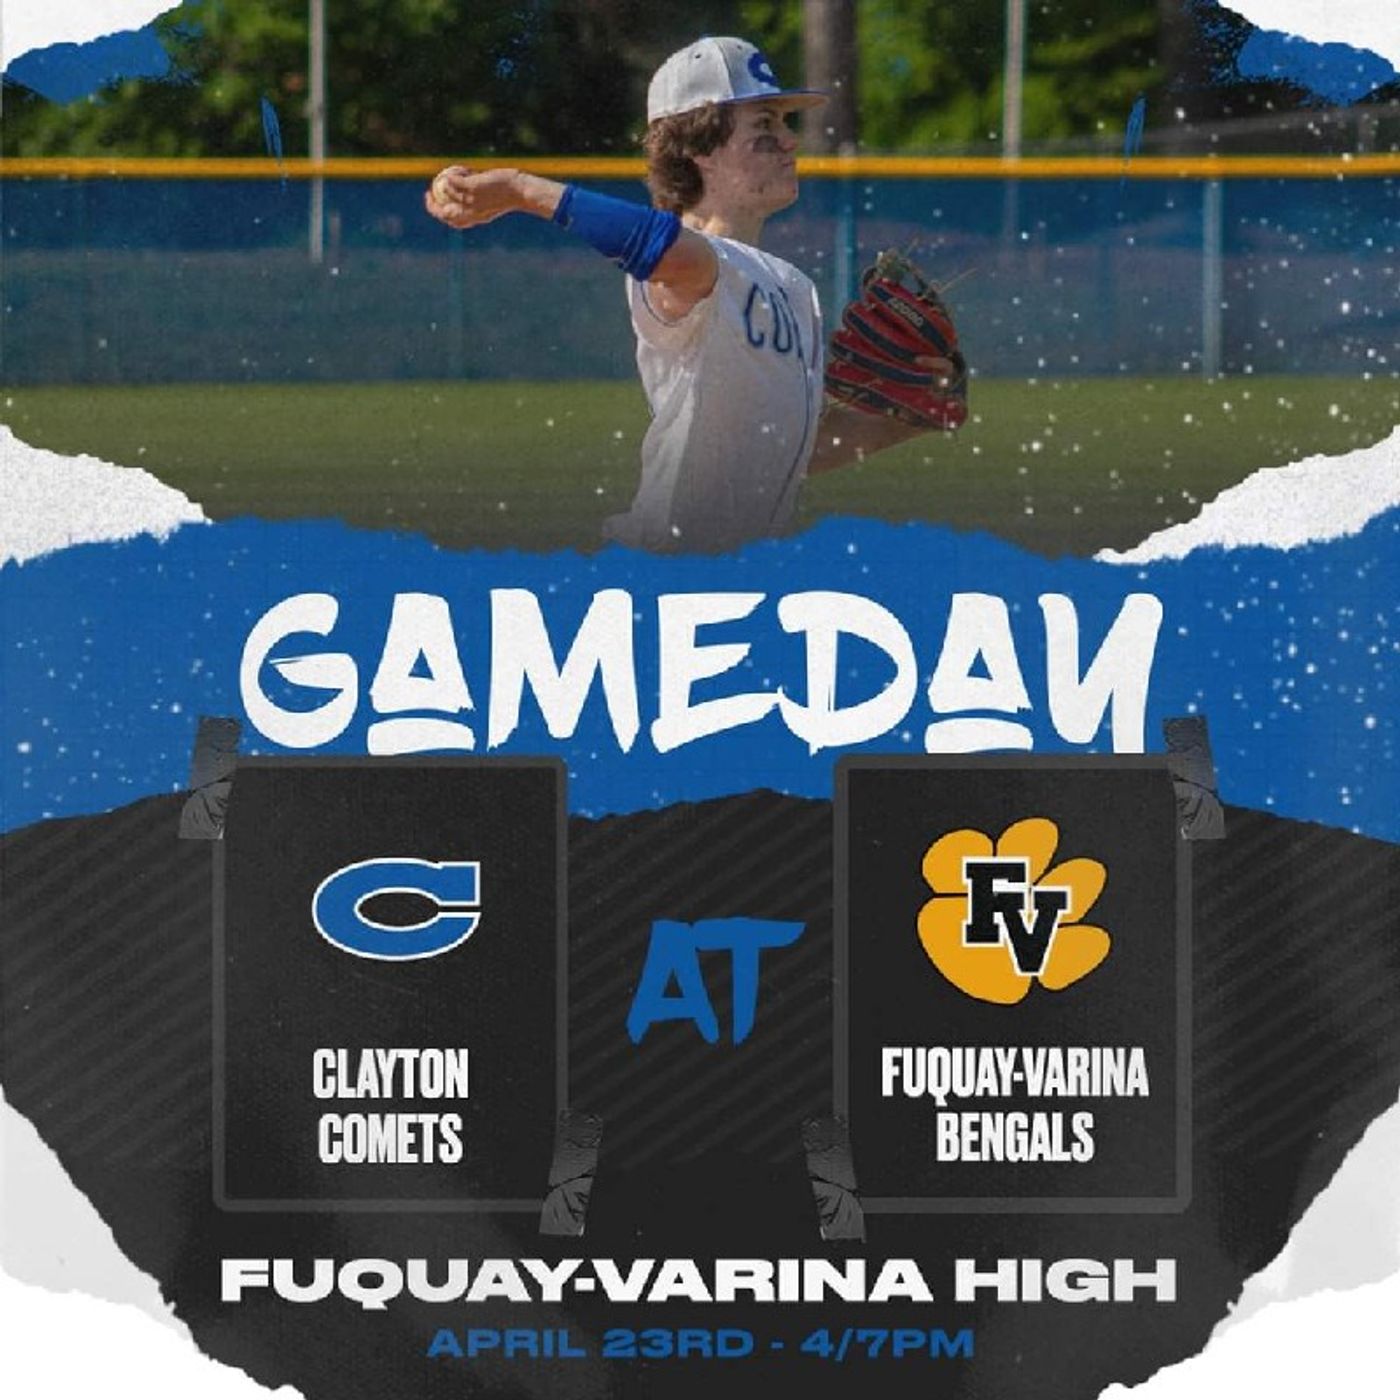 #NCHSAA Greater Neuse River 4-A Conference Varsity Baseball Clayton Comets VS Fuquay-Varina Bengals! #WeAreCRN #GoComets